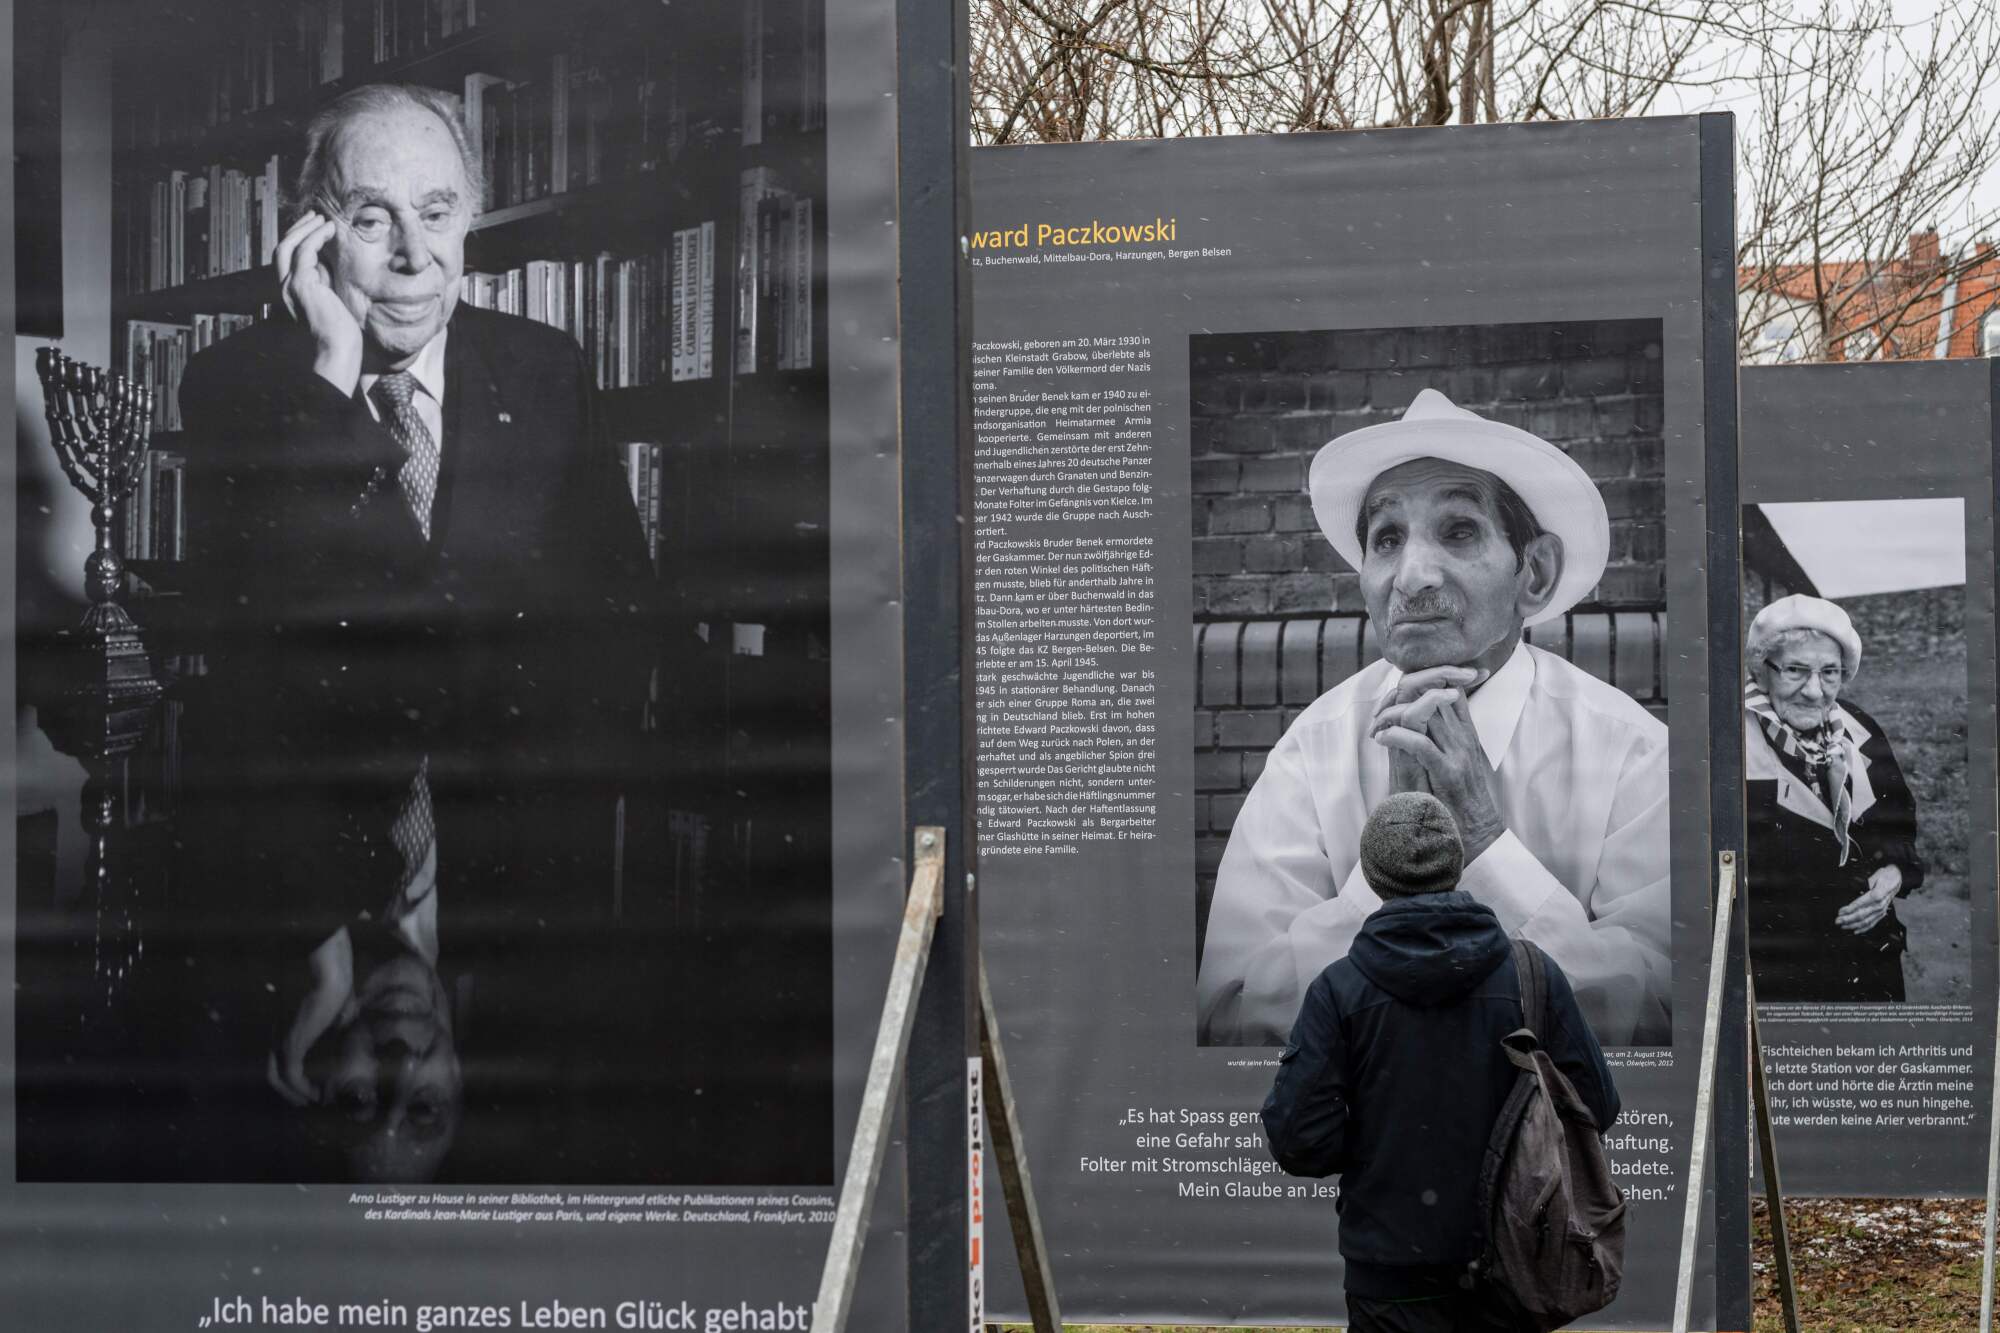 A visitor looks at portraits of Holocaust survivors in the exhibition "Concentration Camp Survivors"